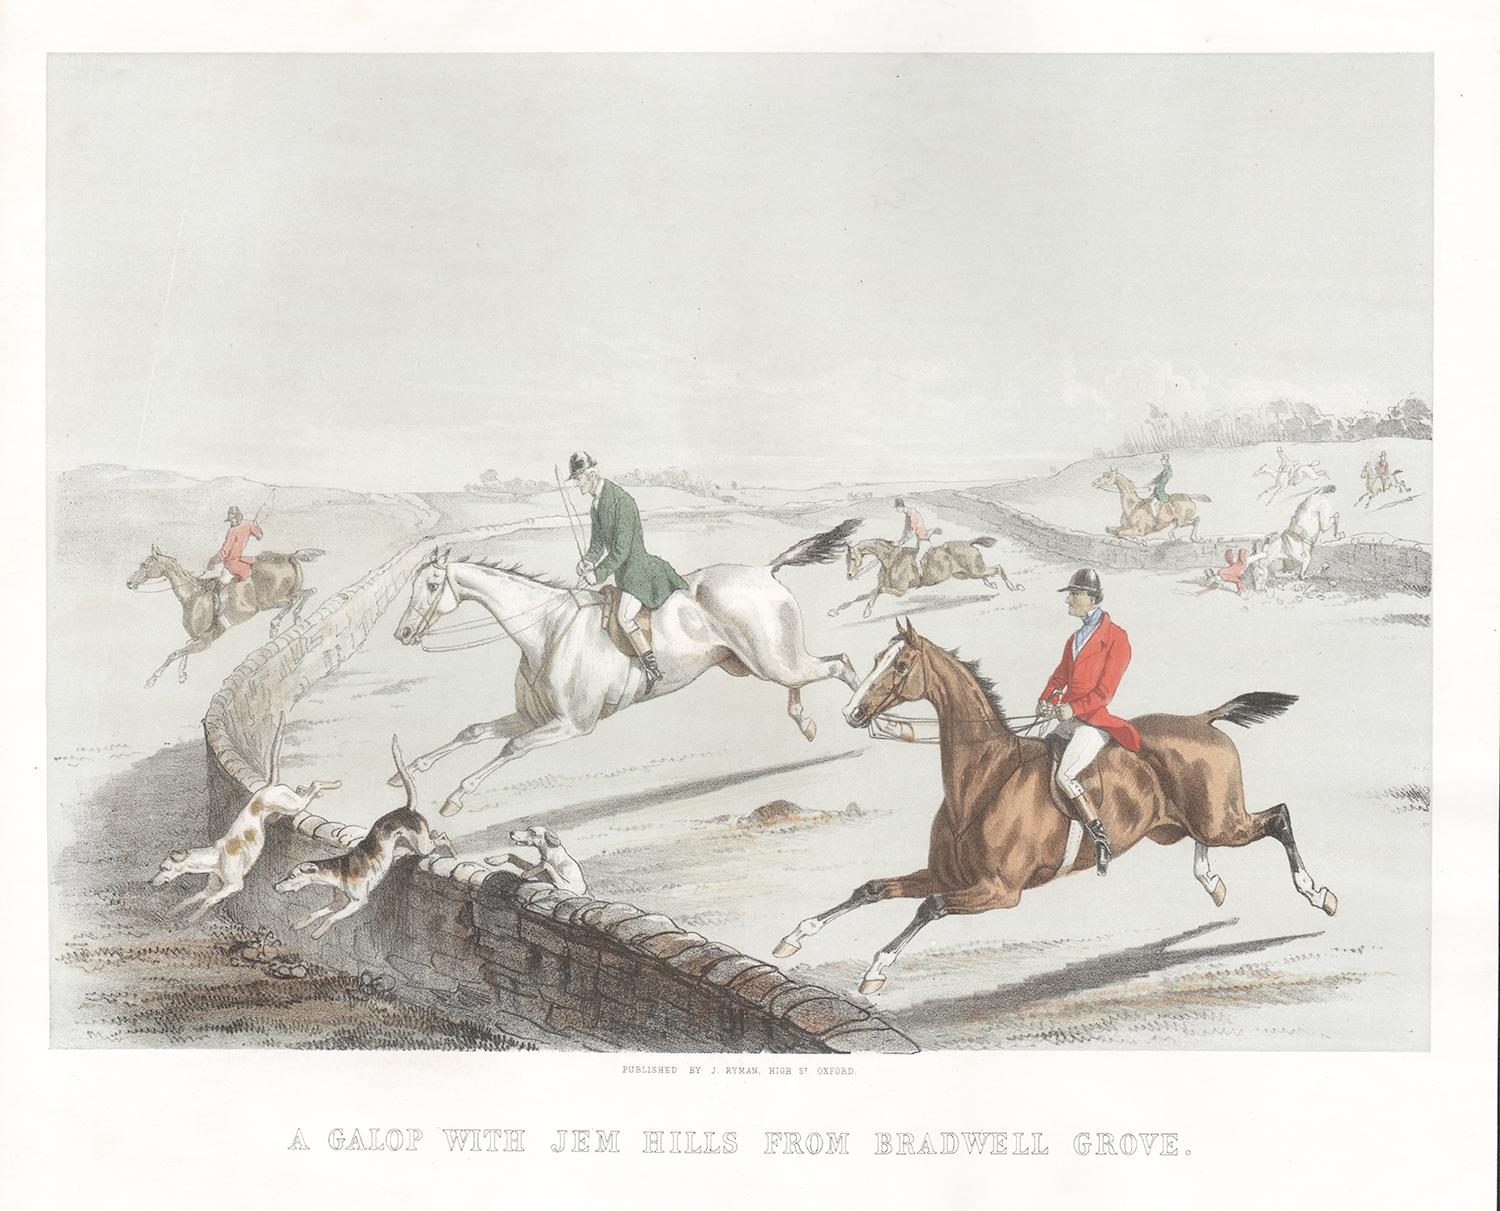 A Galop with Jem Hills from Bradwell Grove, English hunting lithograph, c1850